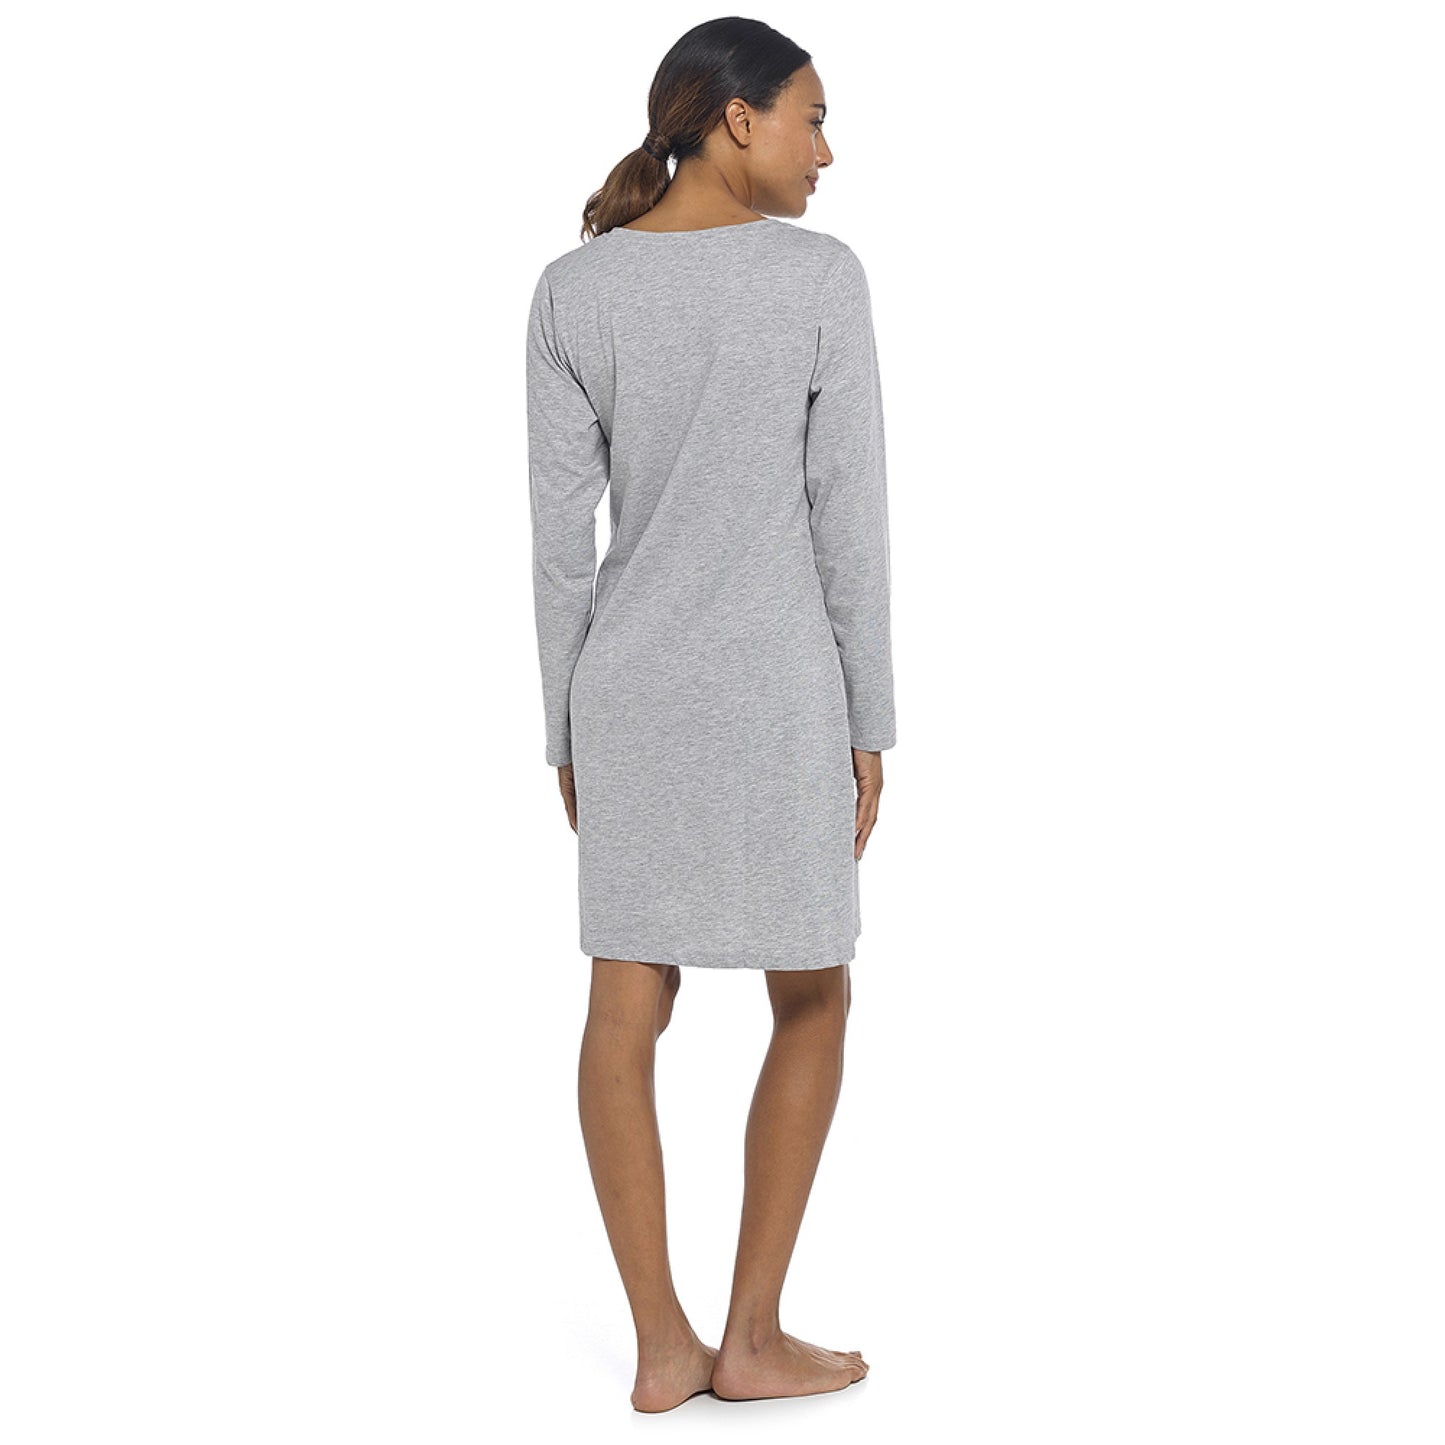 Ladies Cotton Nightie Dalmatian Design Grey Long Sleeved Soft Jersey Nightdress - Look for the Good Spots in Life